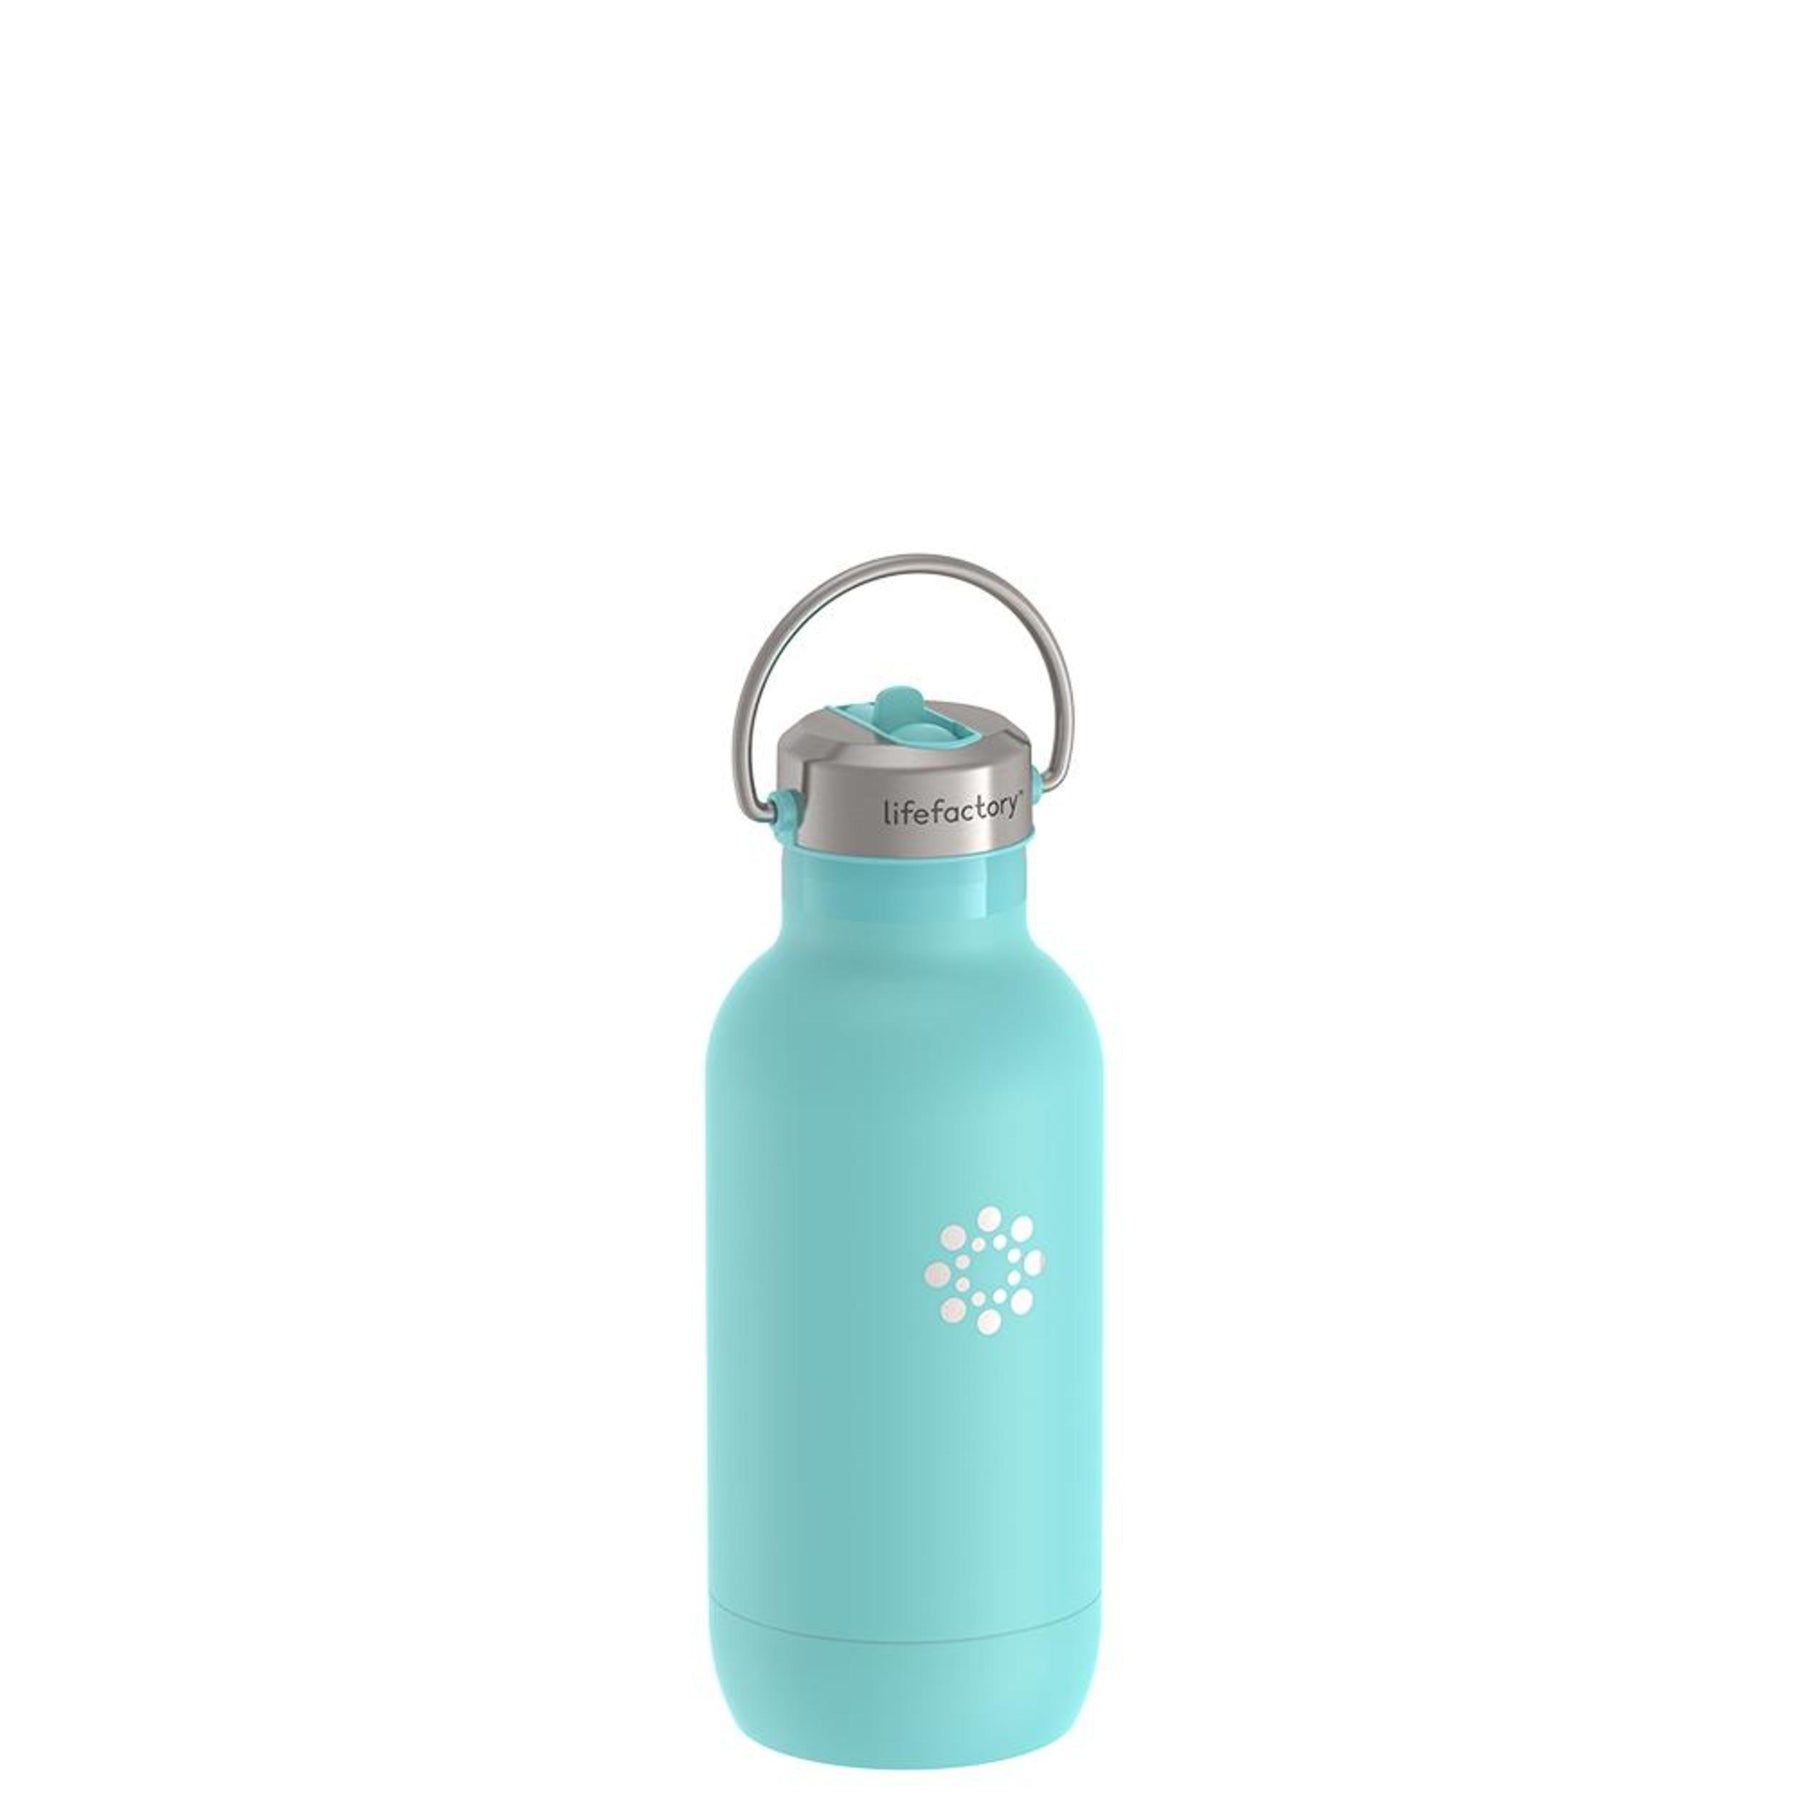 Thermos Kids 16 Ounce Bottle 1 Ea